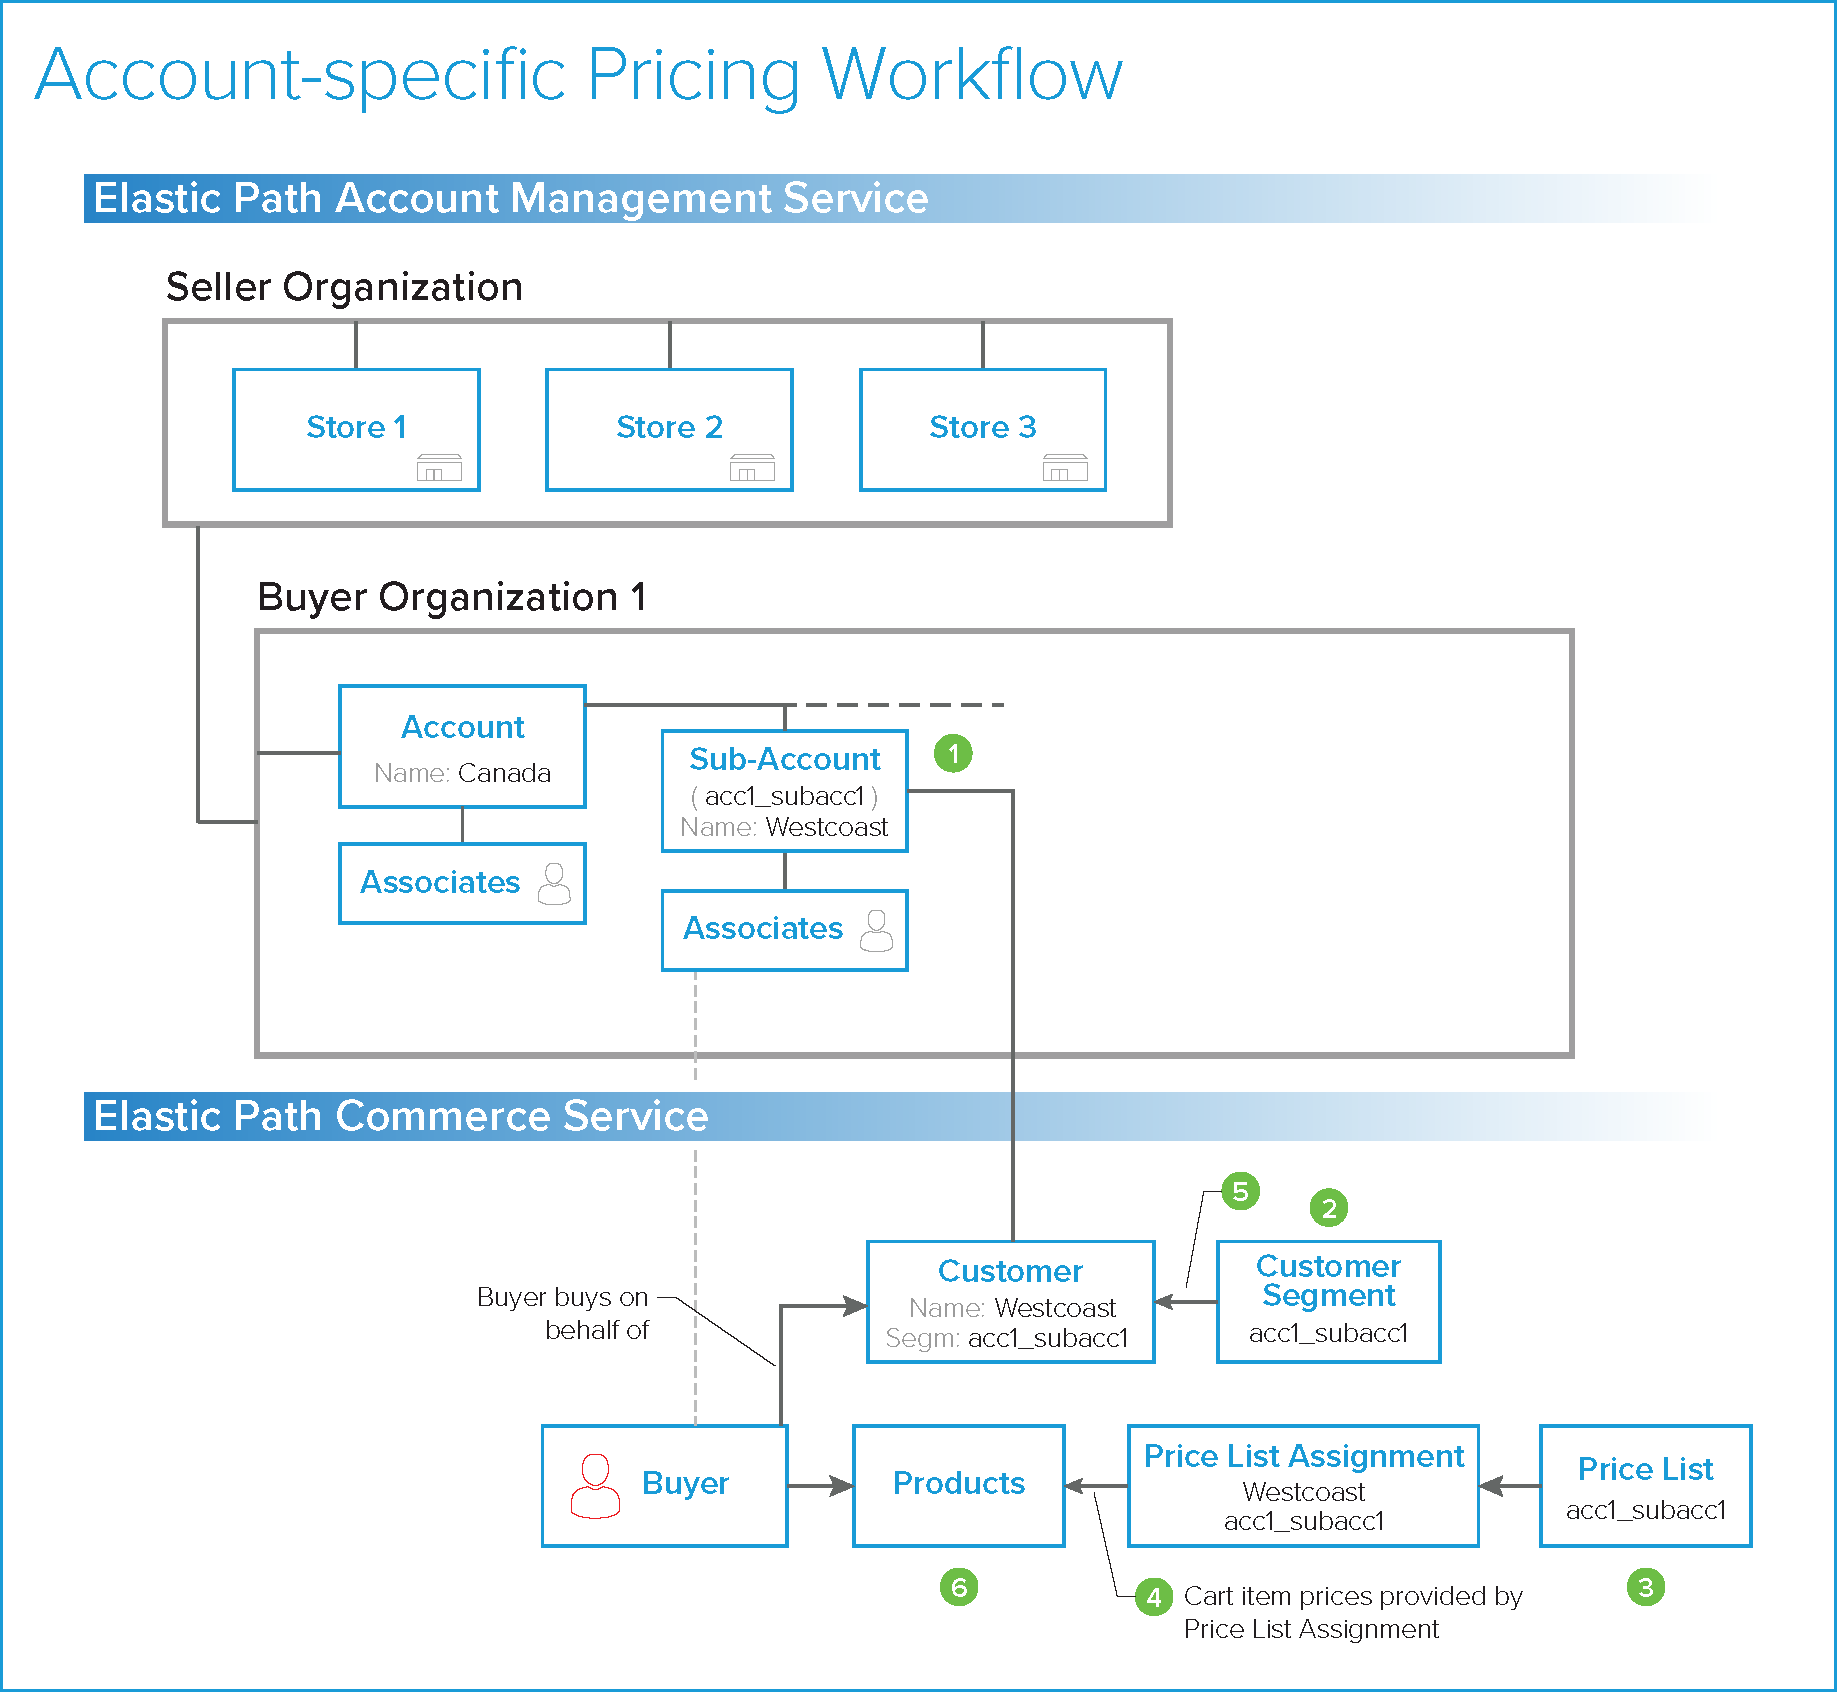 Account Management Service and Elastic Path Commerce